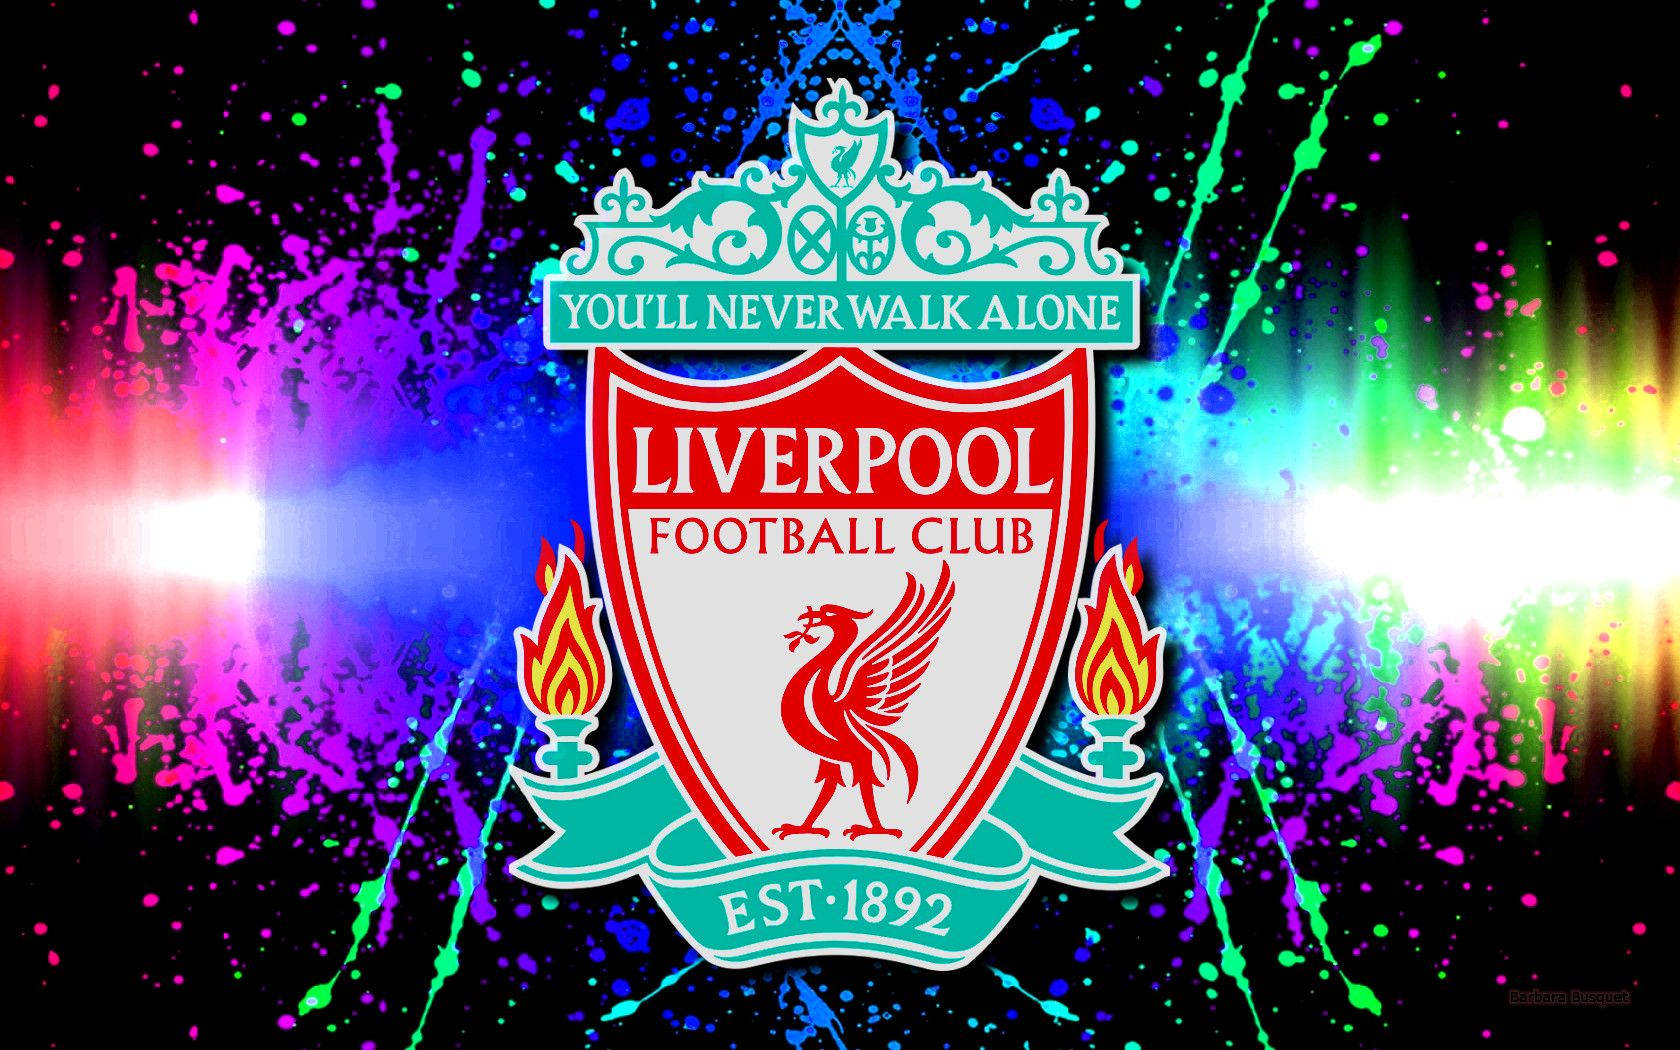 Free Liverpool Wallpaper Downloads, [200+] Liverpool Wallpapers for FREE |  